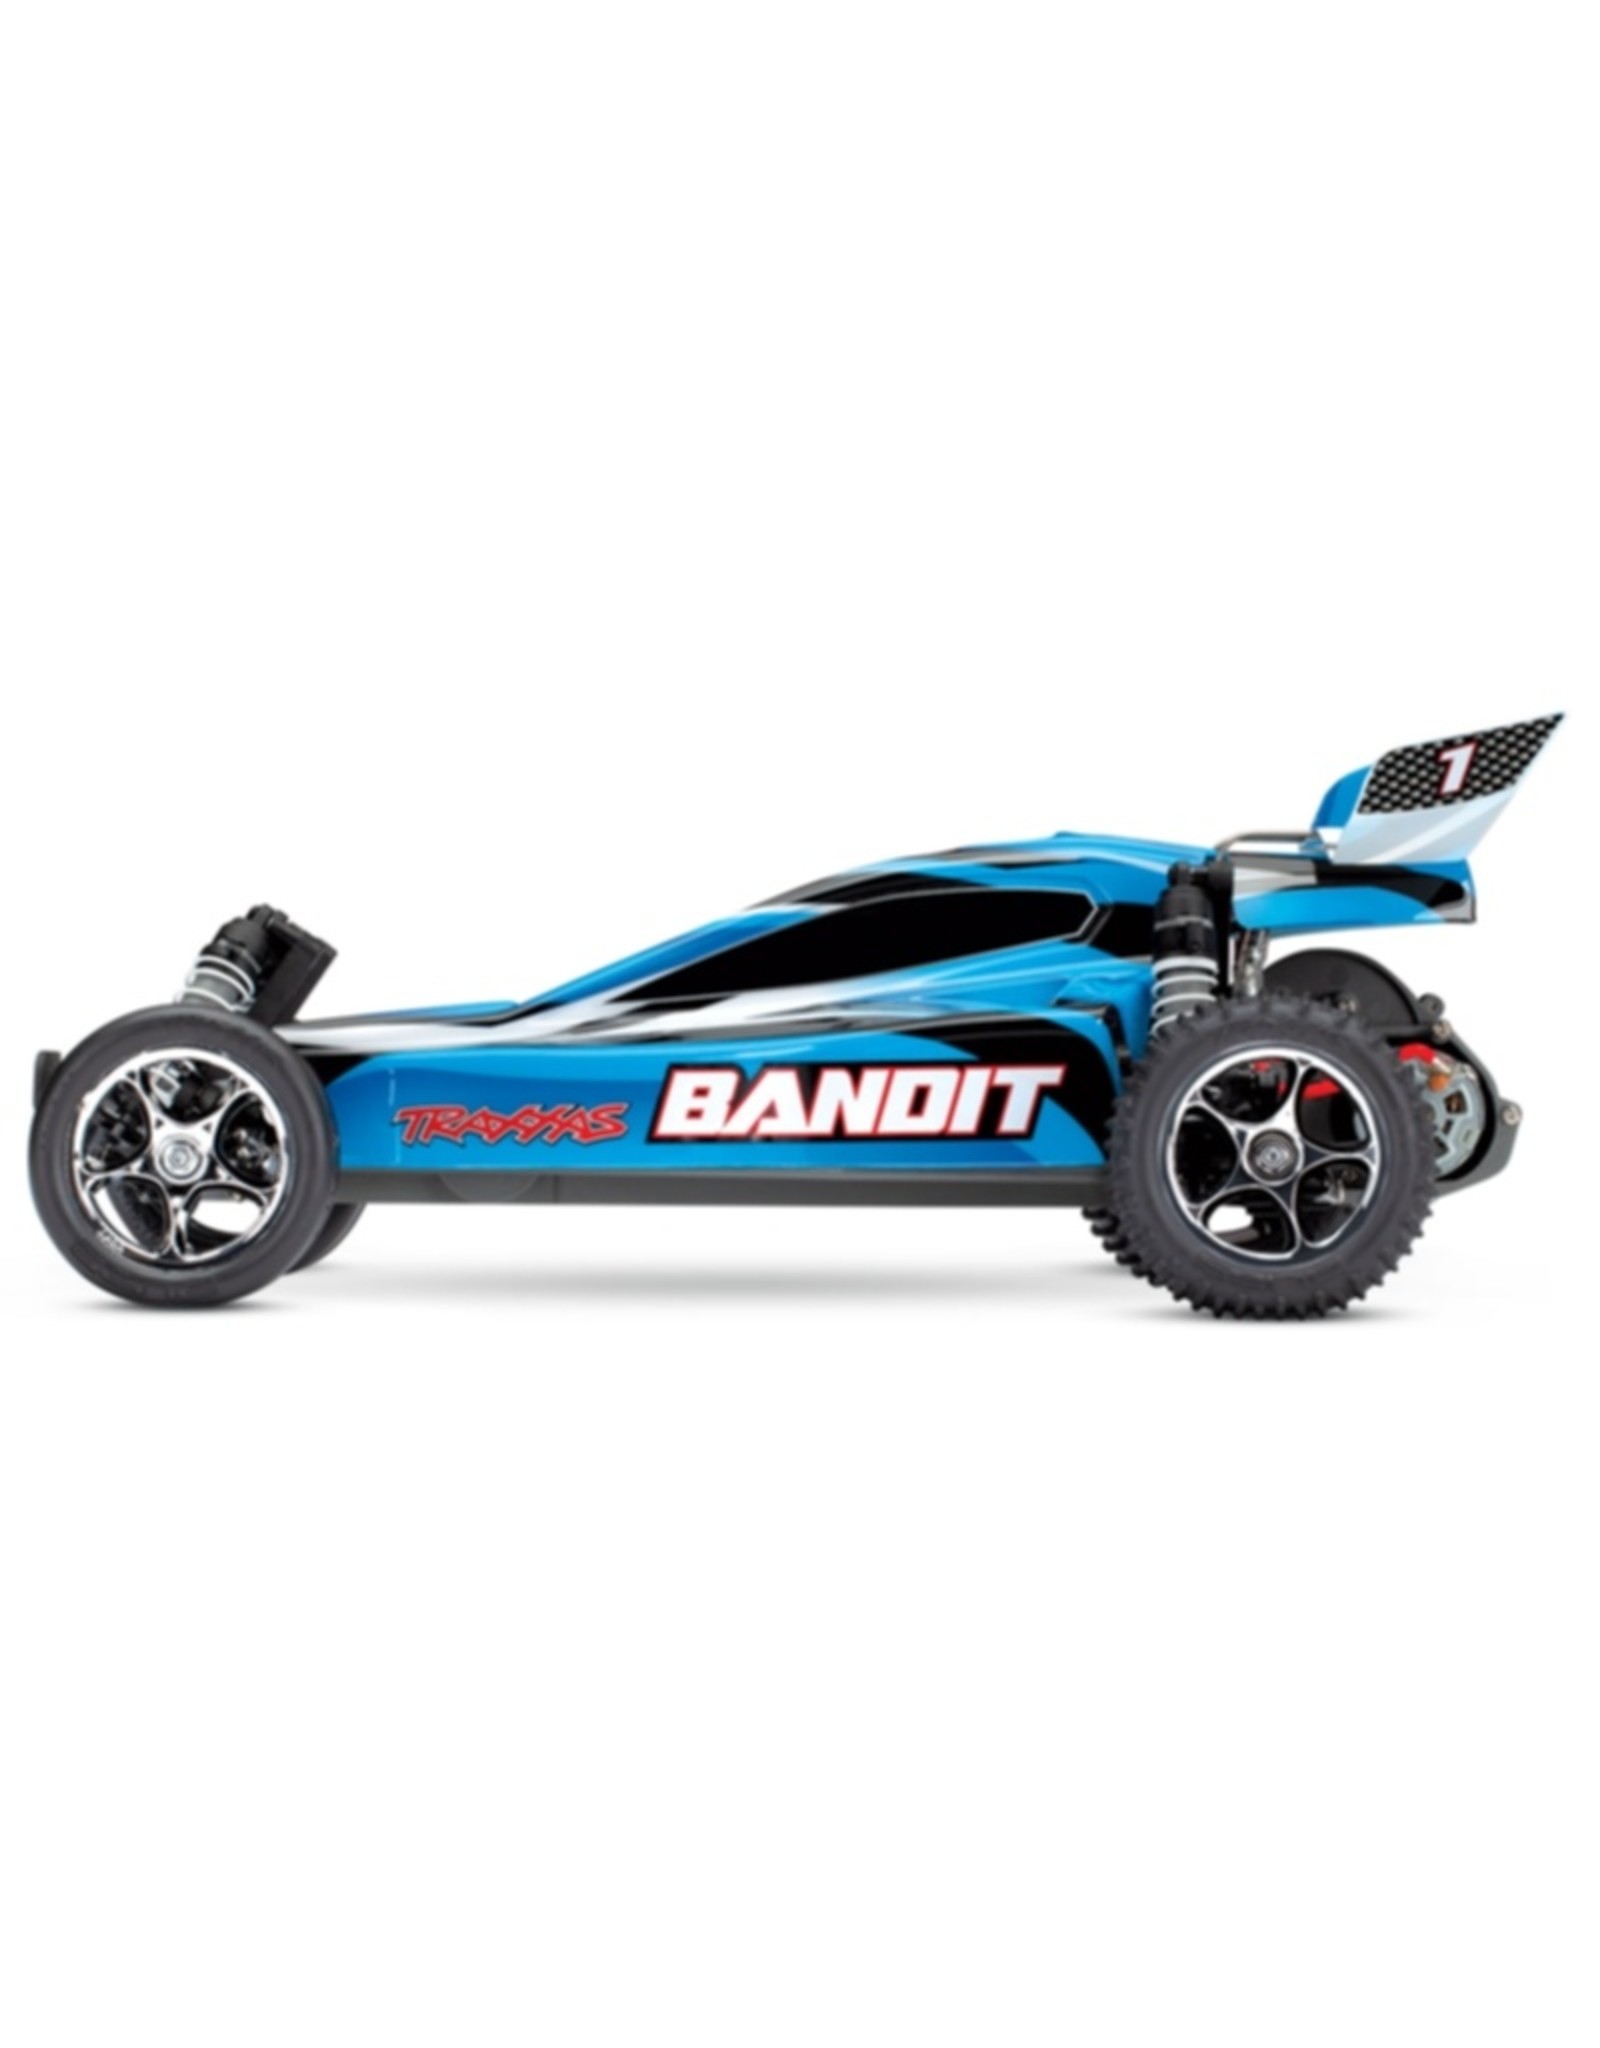 Traxxas TRA24054-4 Blue Bandit : 1/10 Scale Off-Road Buggy with TQ 2.4GHz radio system